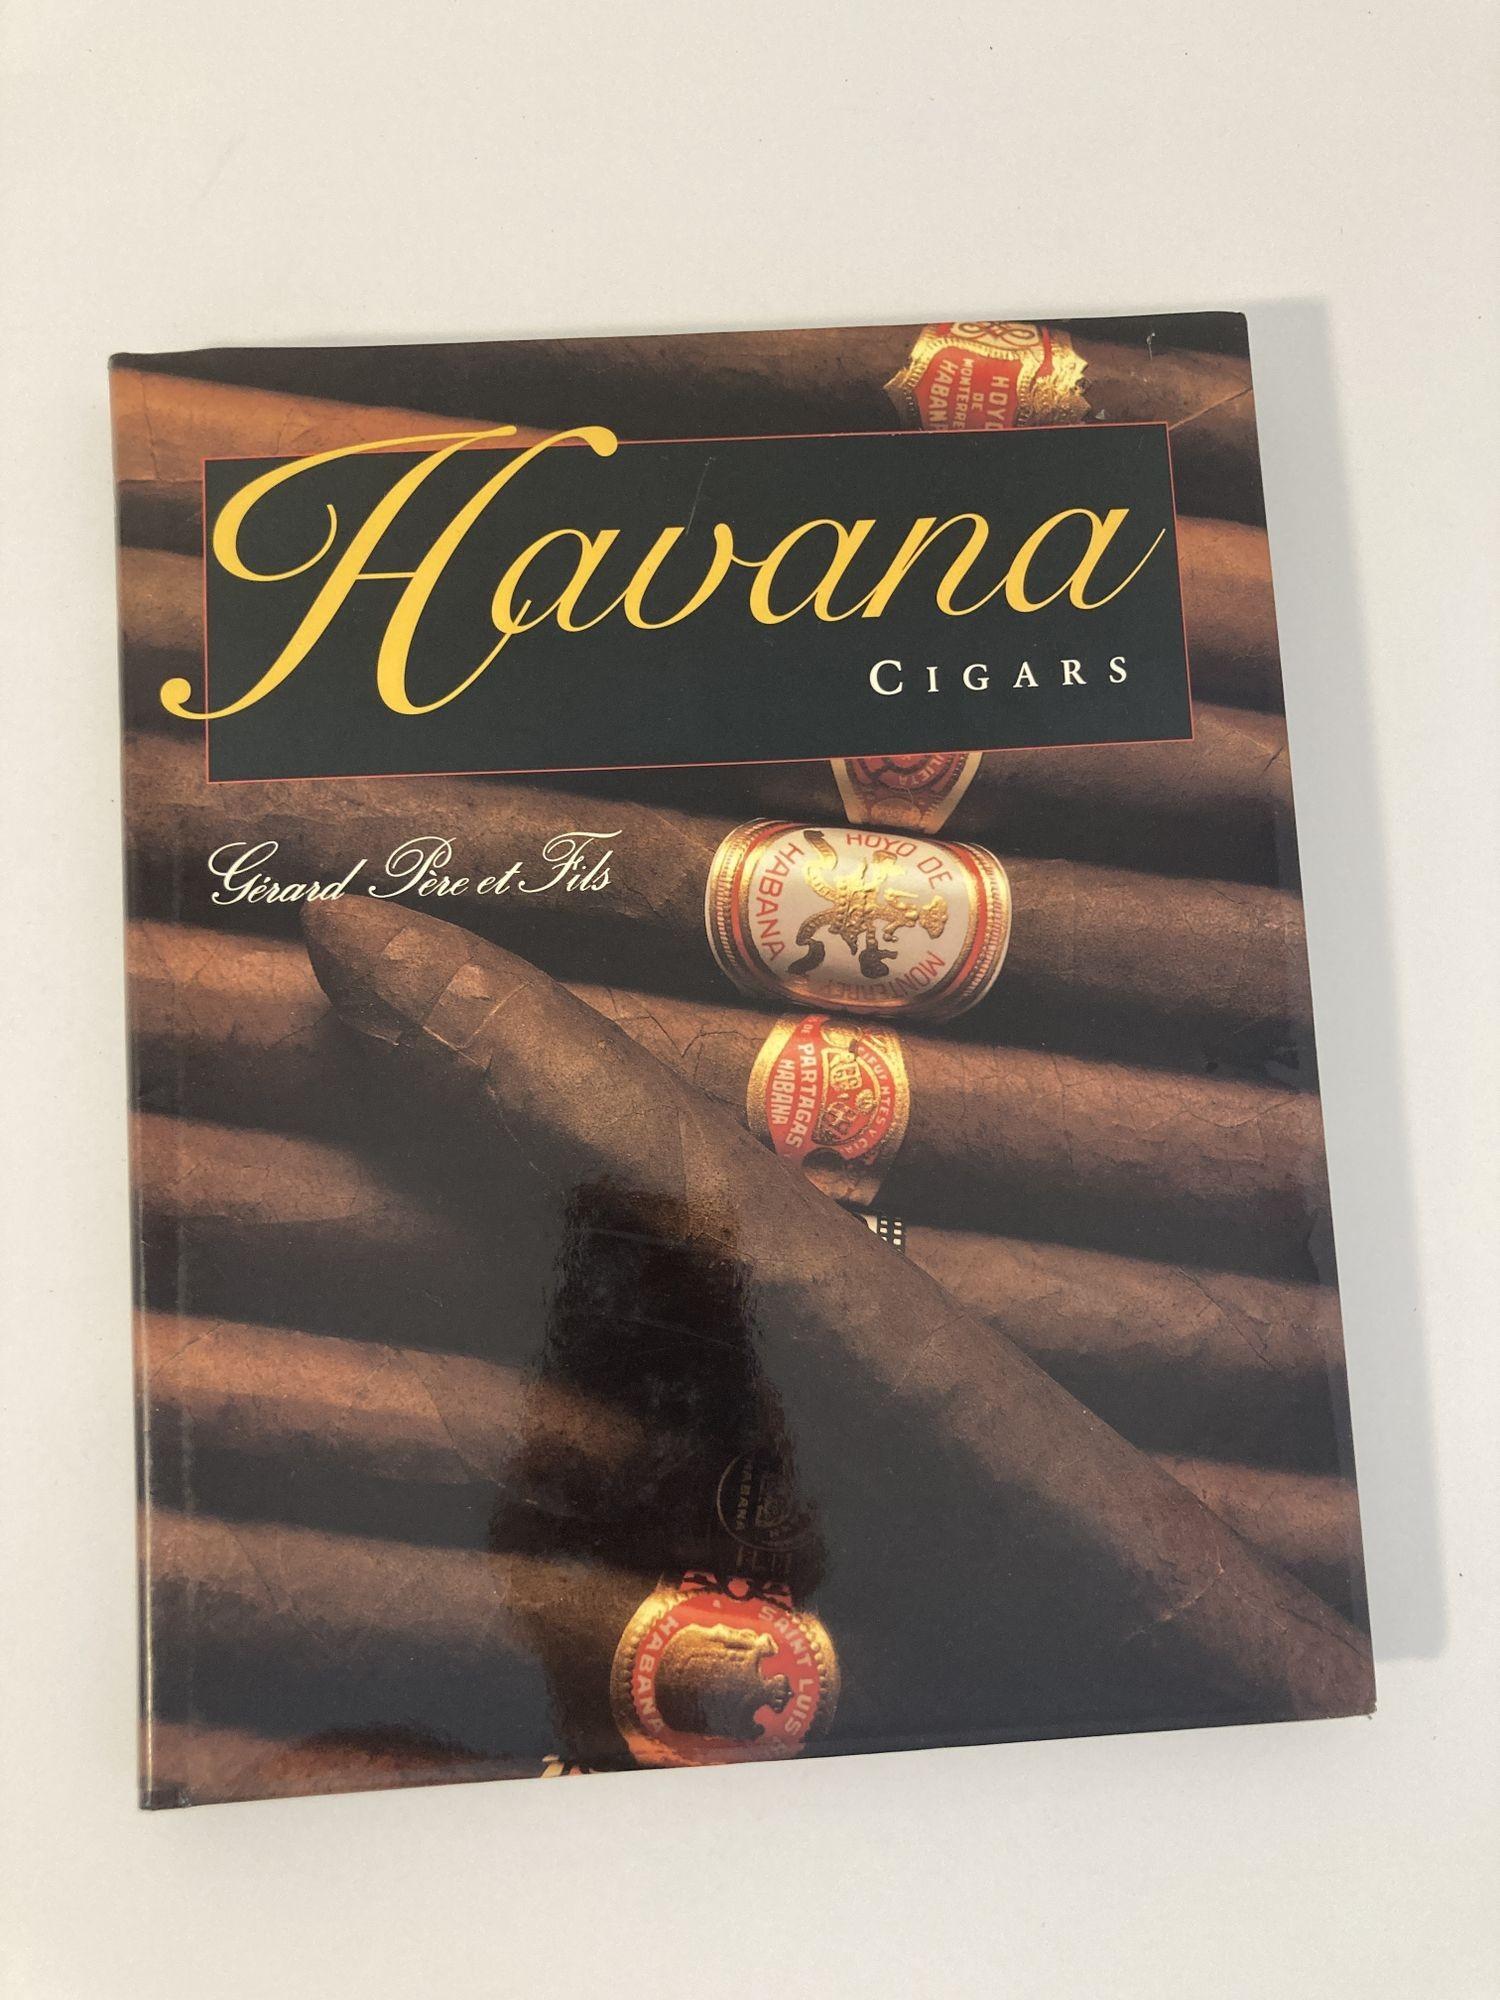 Havana Cigars hardcover book by Gerard Pere et Fils.
Wonderful, rich full-page photography by Matthieu Prier of many Cubano favorites.
Experience the Refined Luxury of the Havana Cigars, long synonymous with good taste and sophistication, Havanas